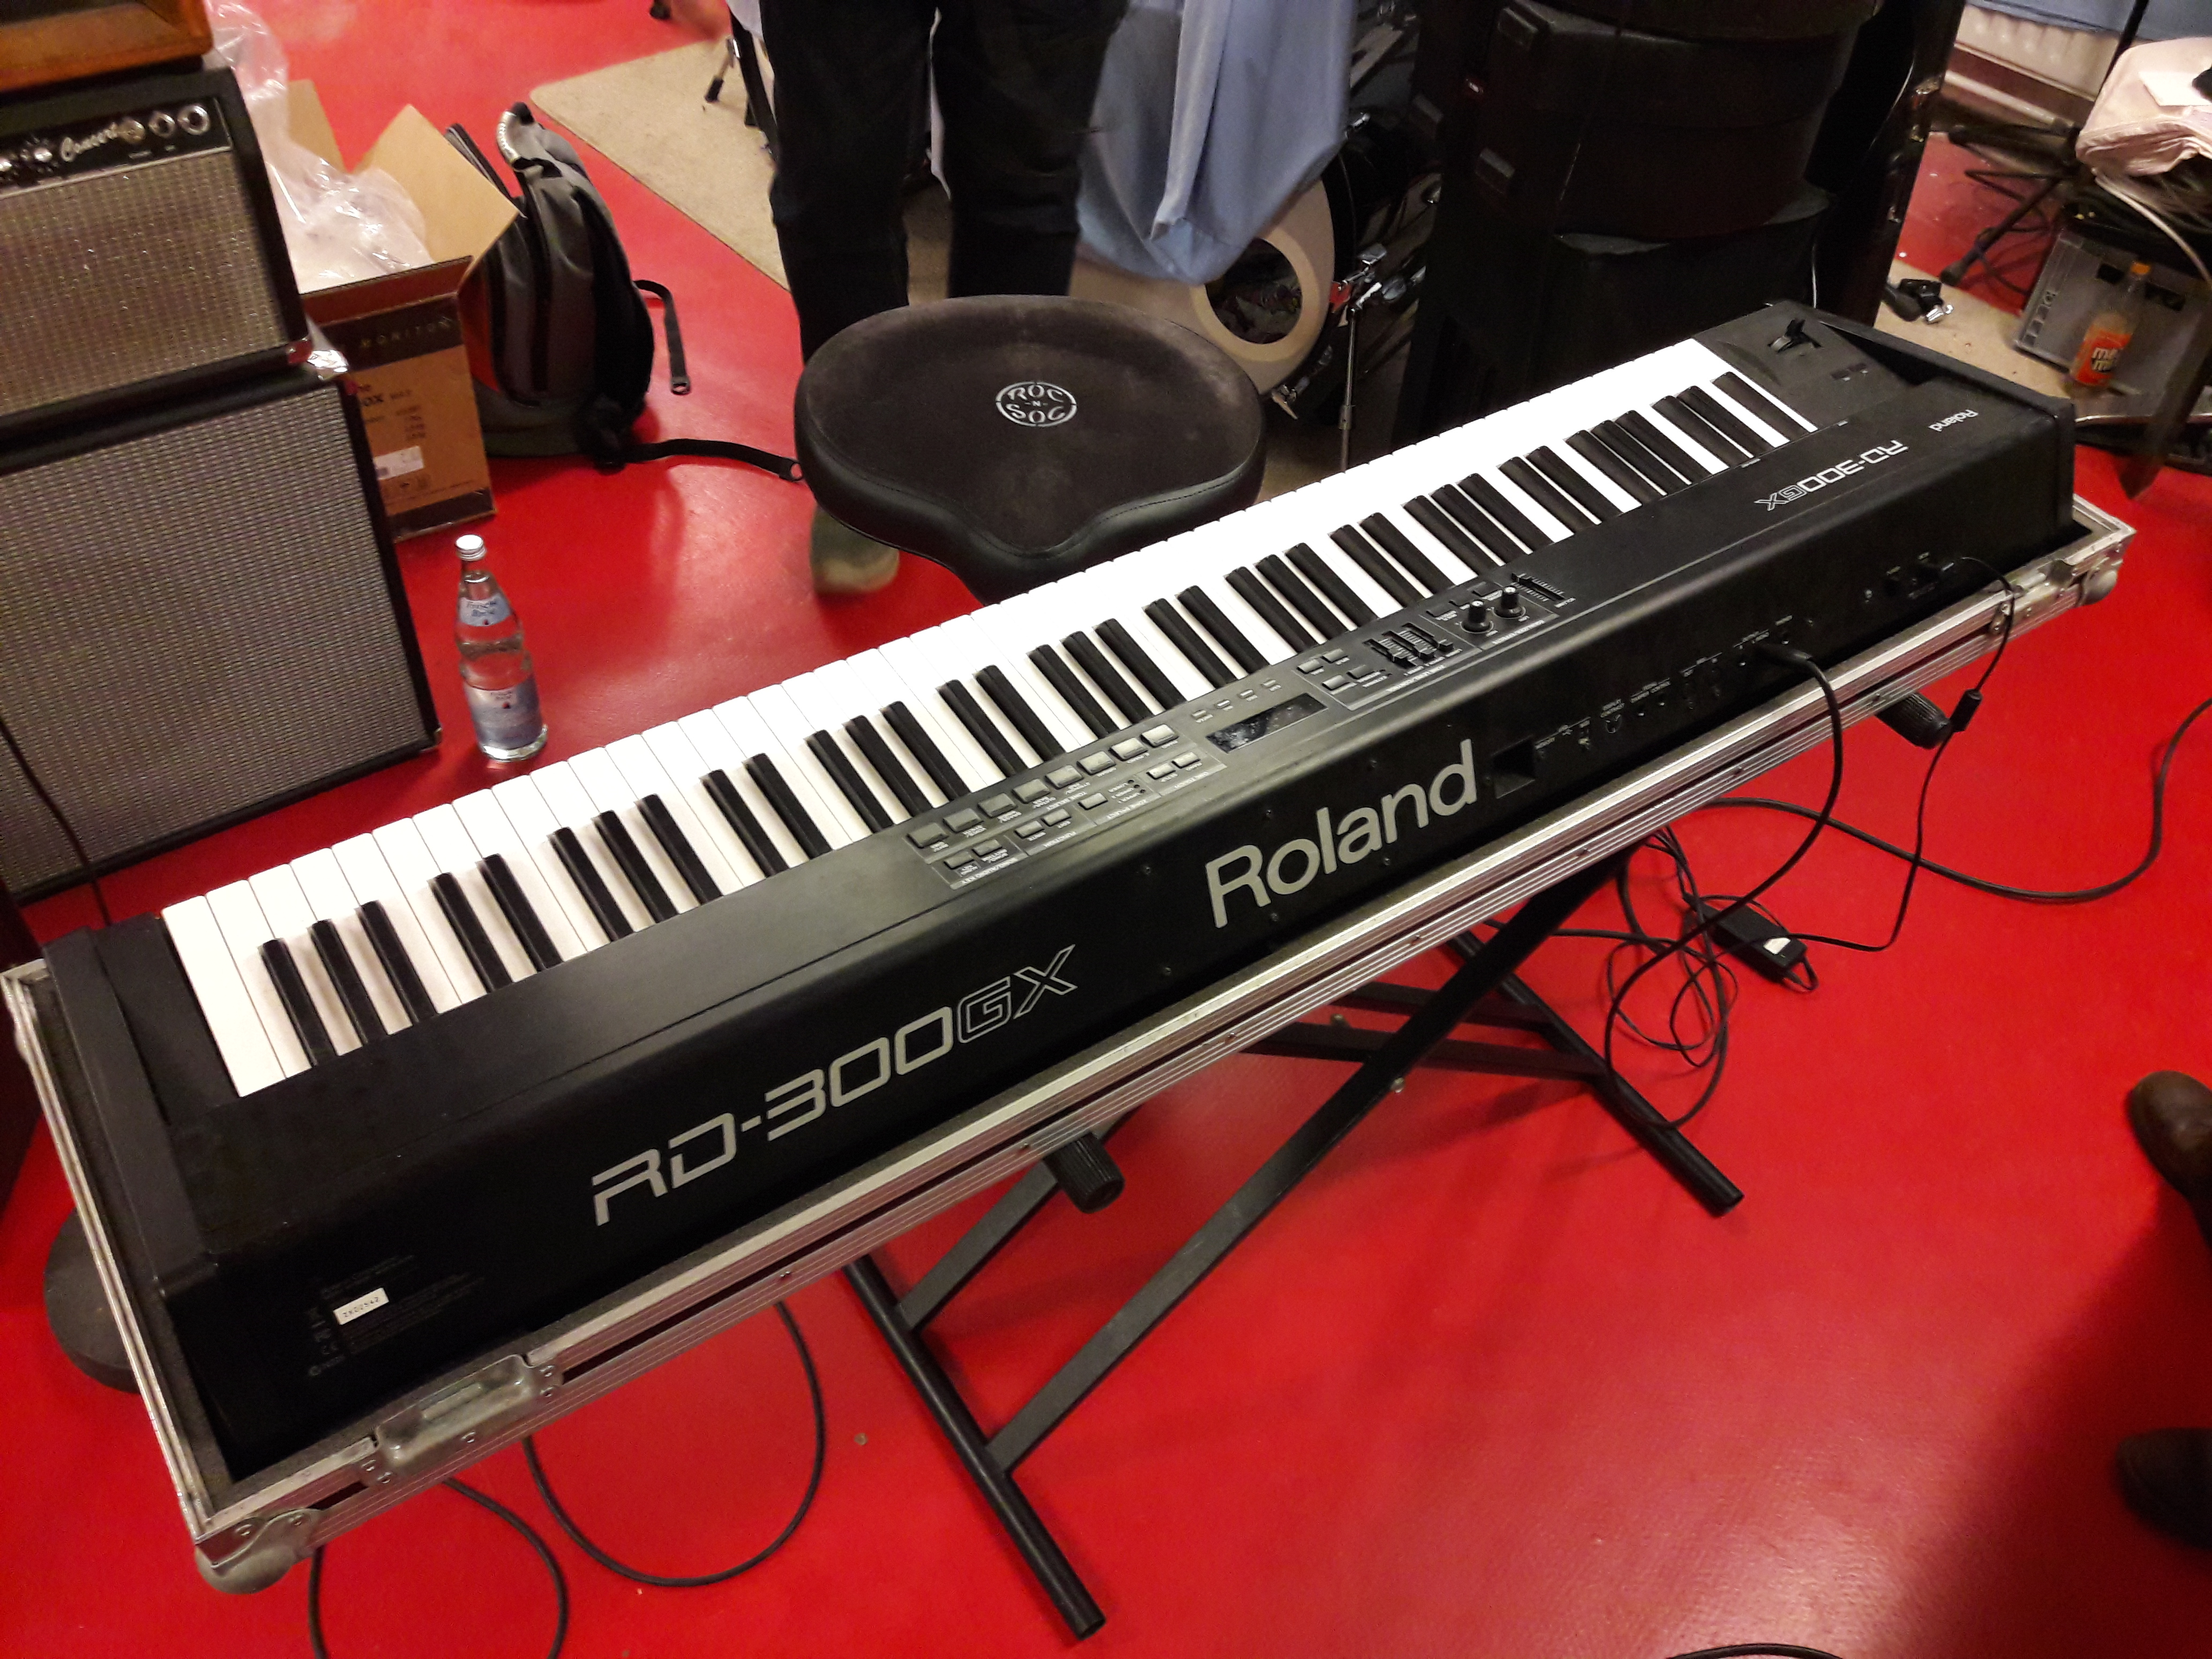 Stagepiano "Roland RD 300 GX" (Marks Piano)